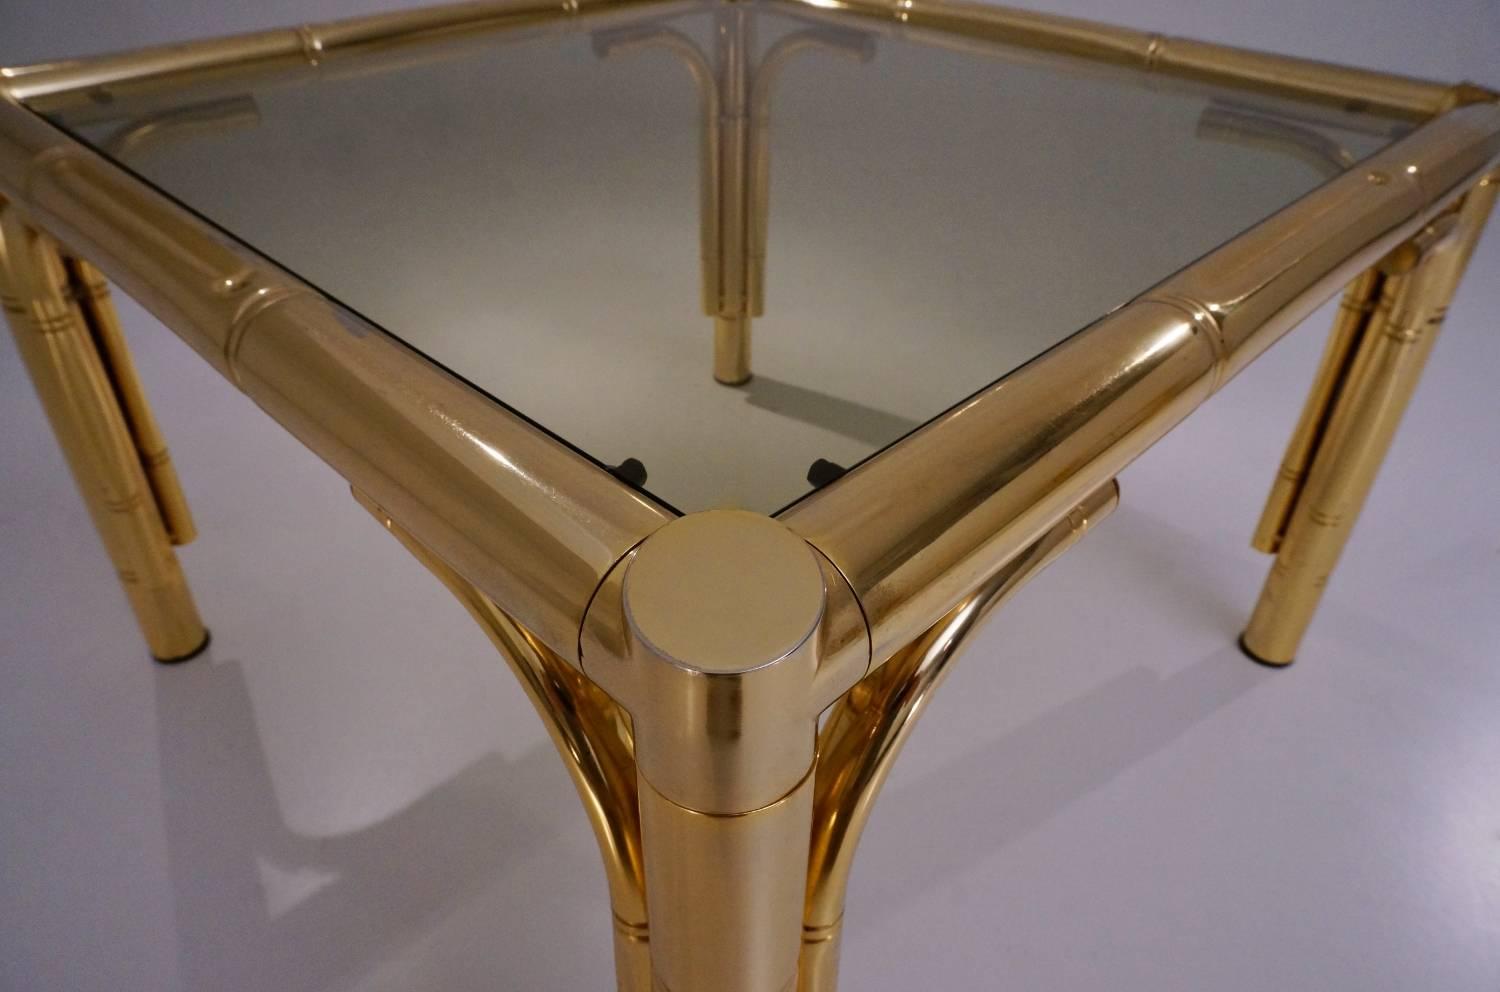 Gold Plate Maison Baguès Tables, Pair in Brass Bamboo Effect, 1970s, French